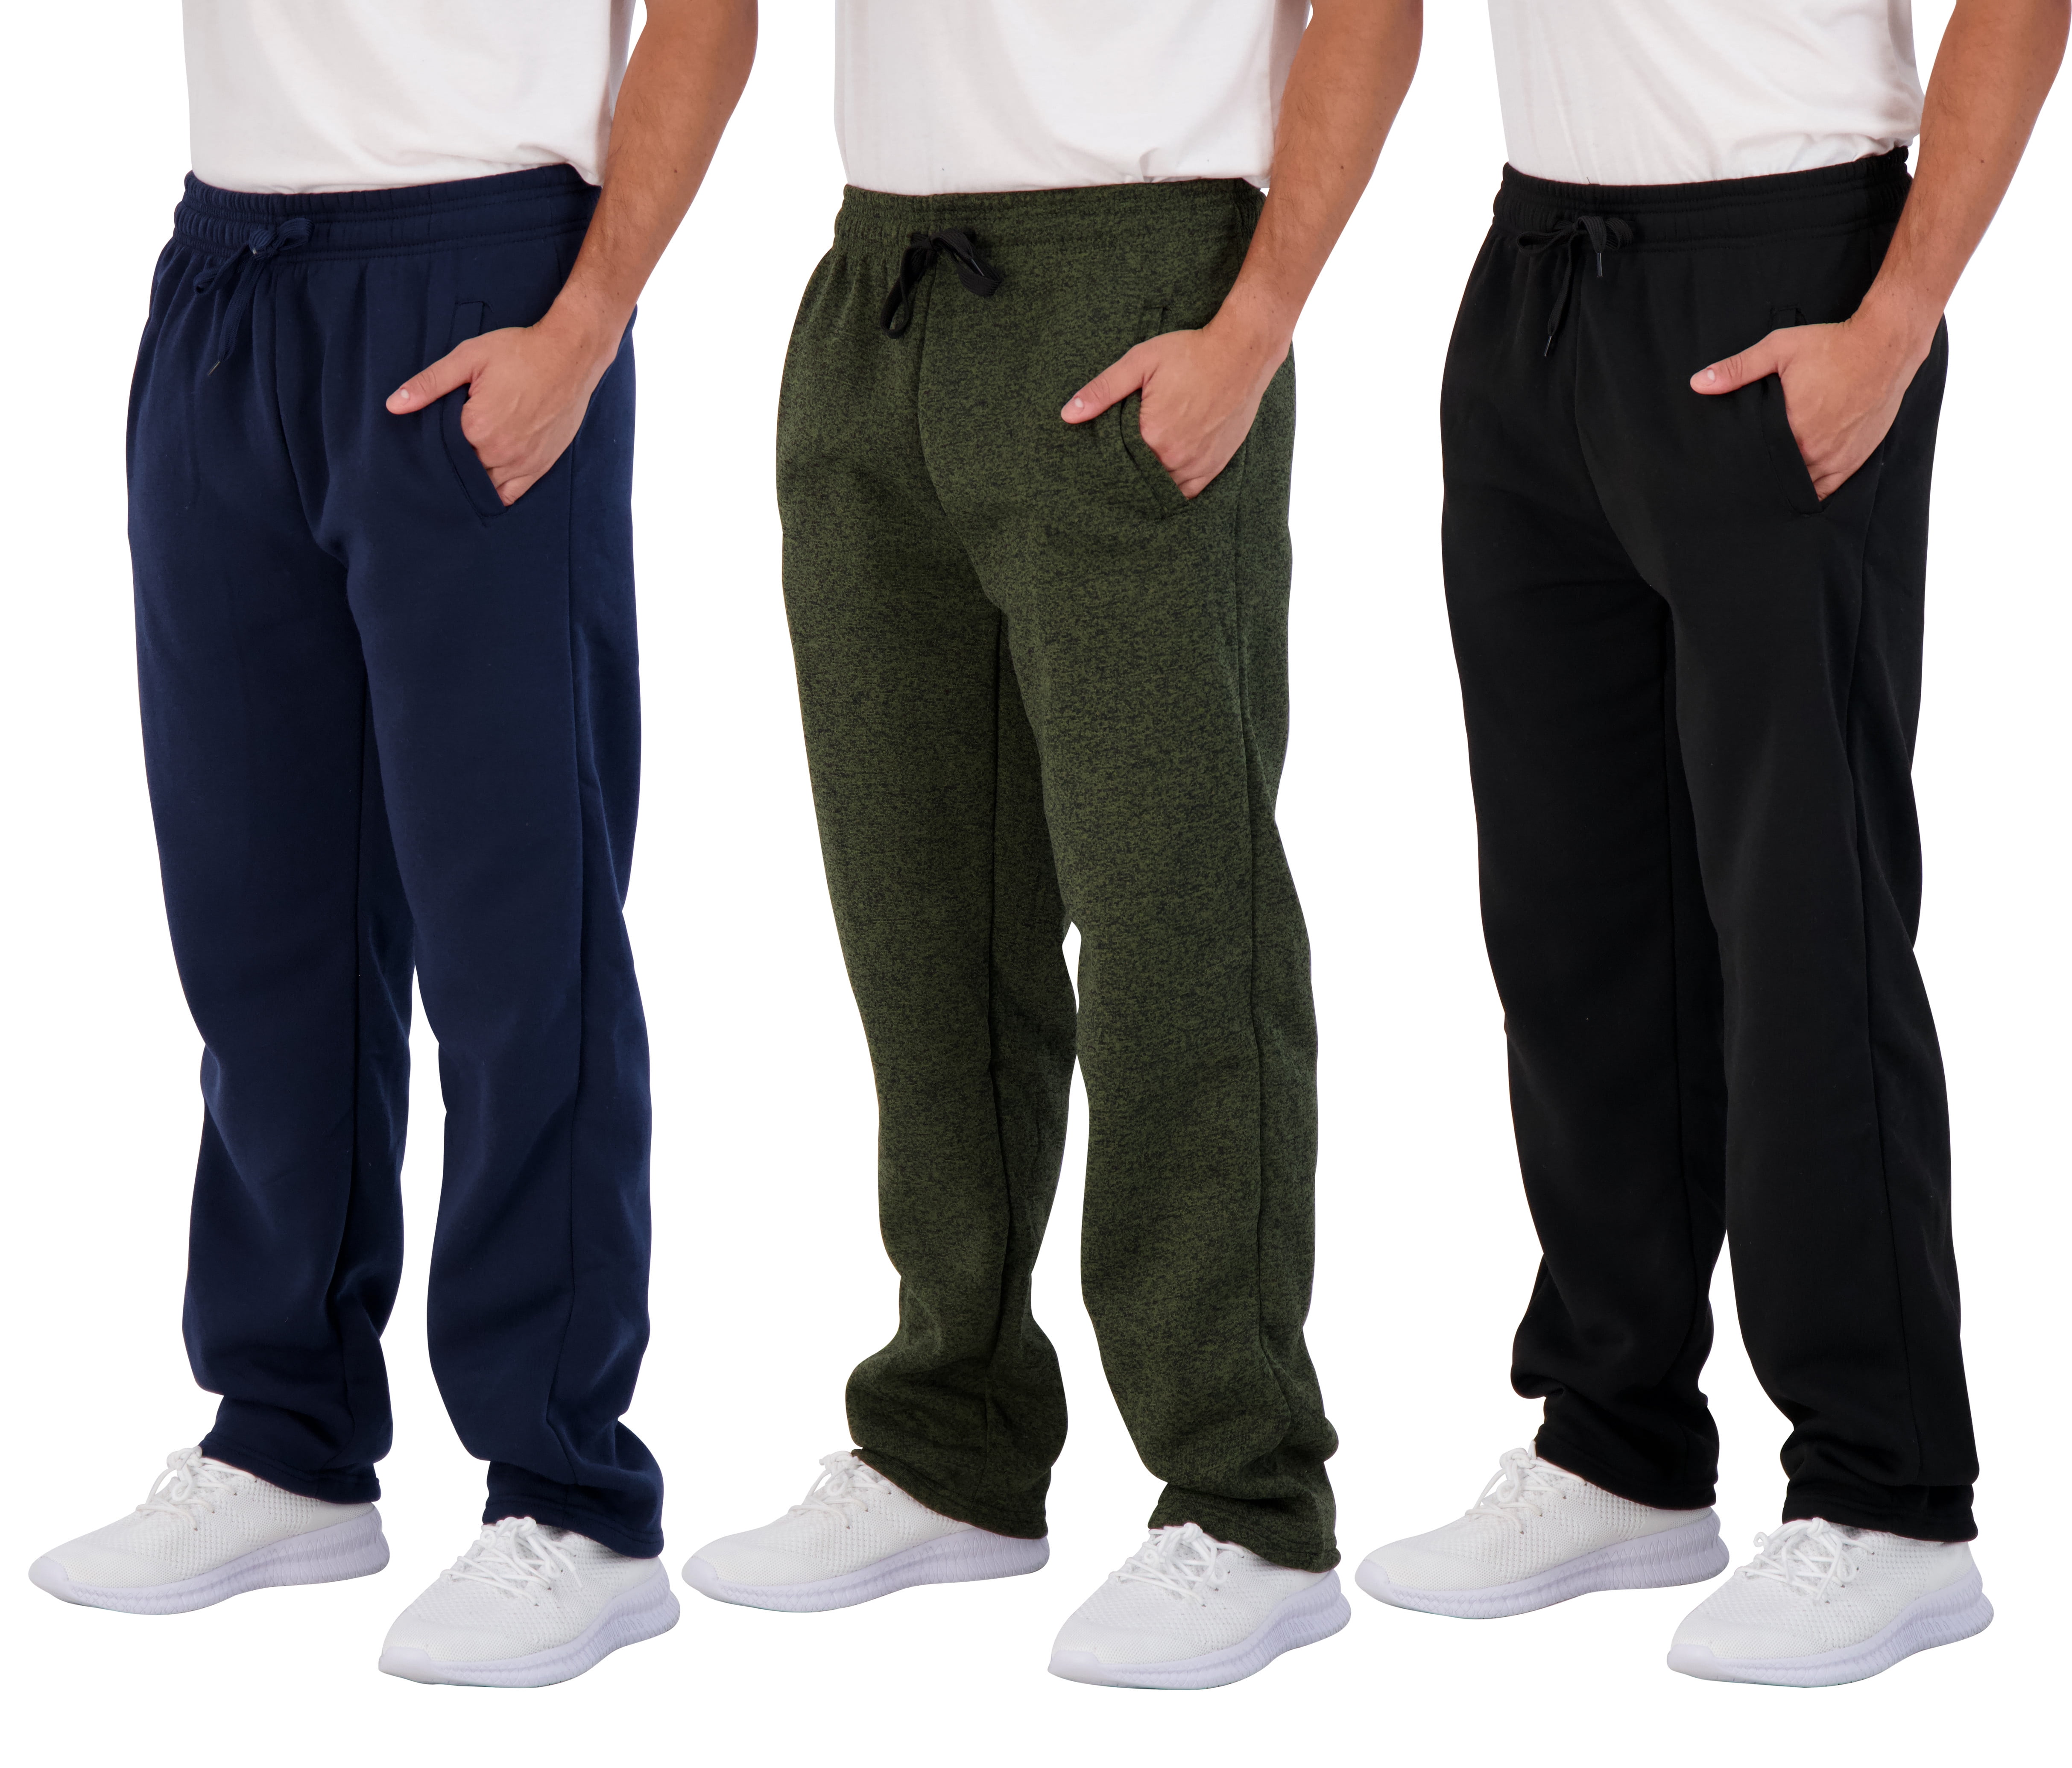 Real Essentials 3 Pack: Men's Tech Fleece Ultra-Soft Warm Jogger Athletic  Sweatpants with Pockets (Available in Big & Tall), Set I, 3X Tall